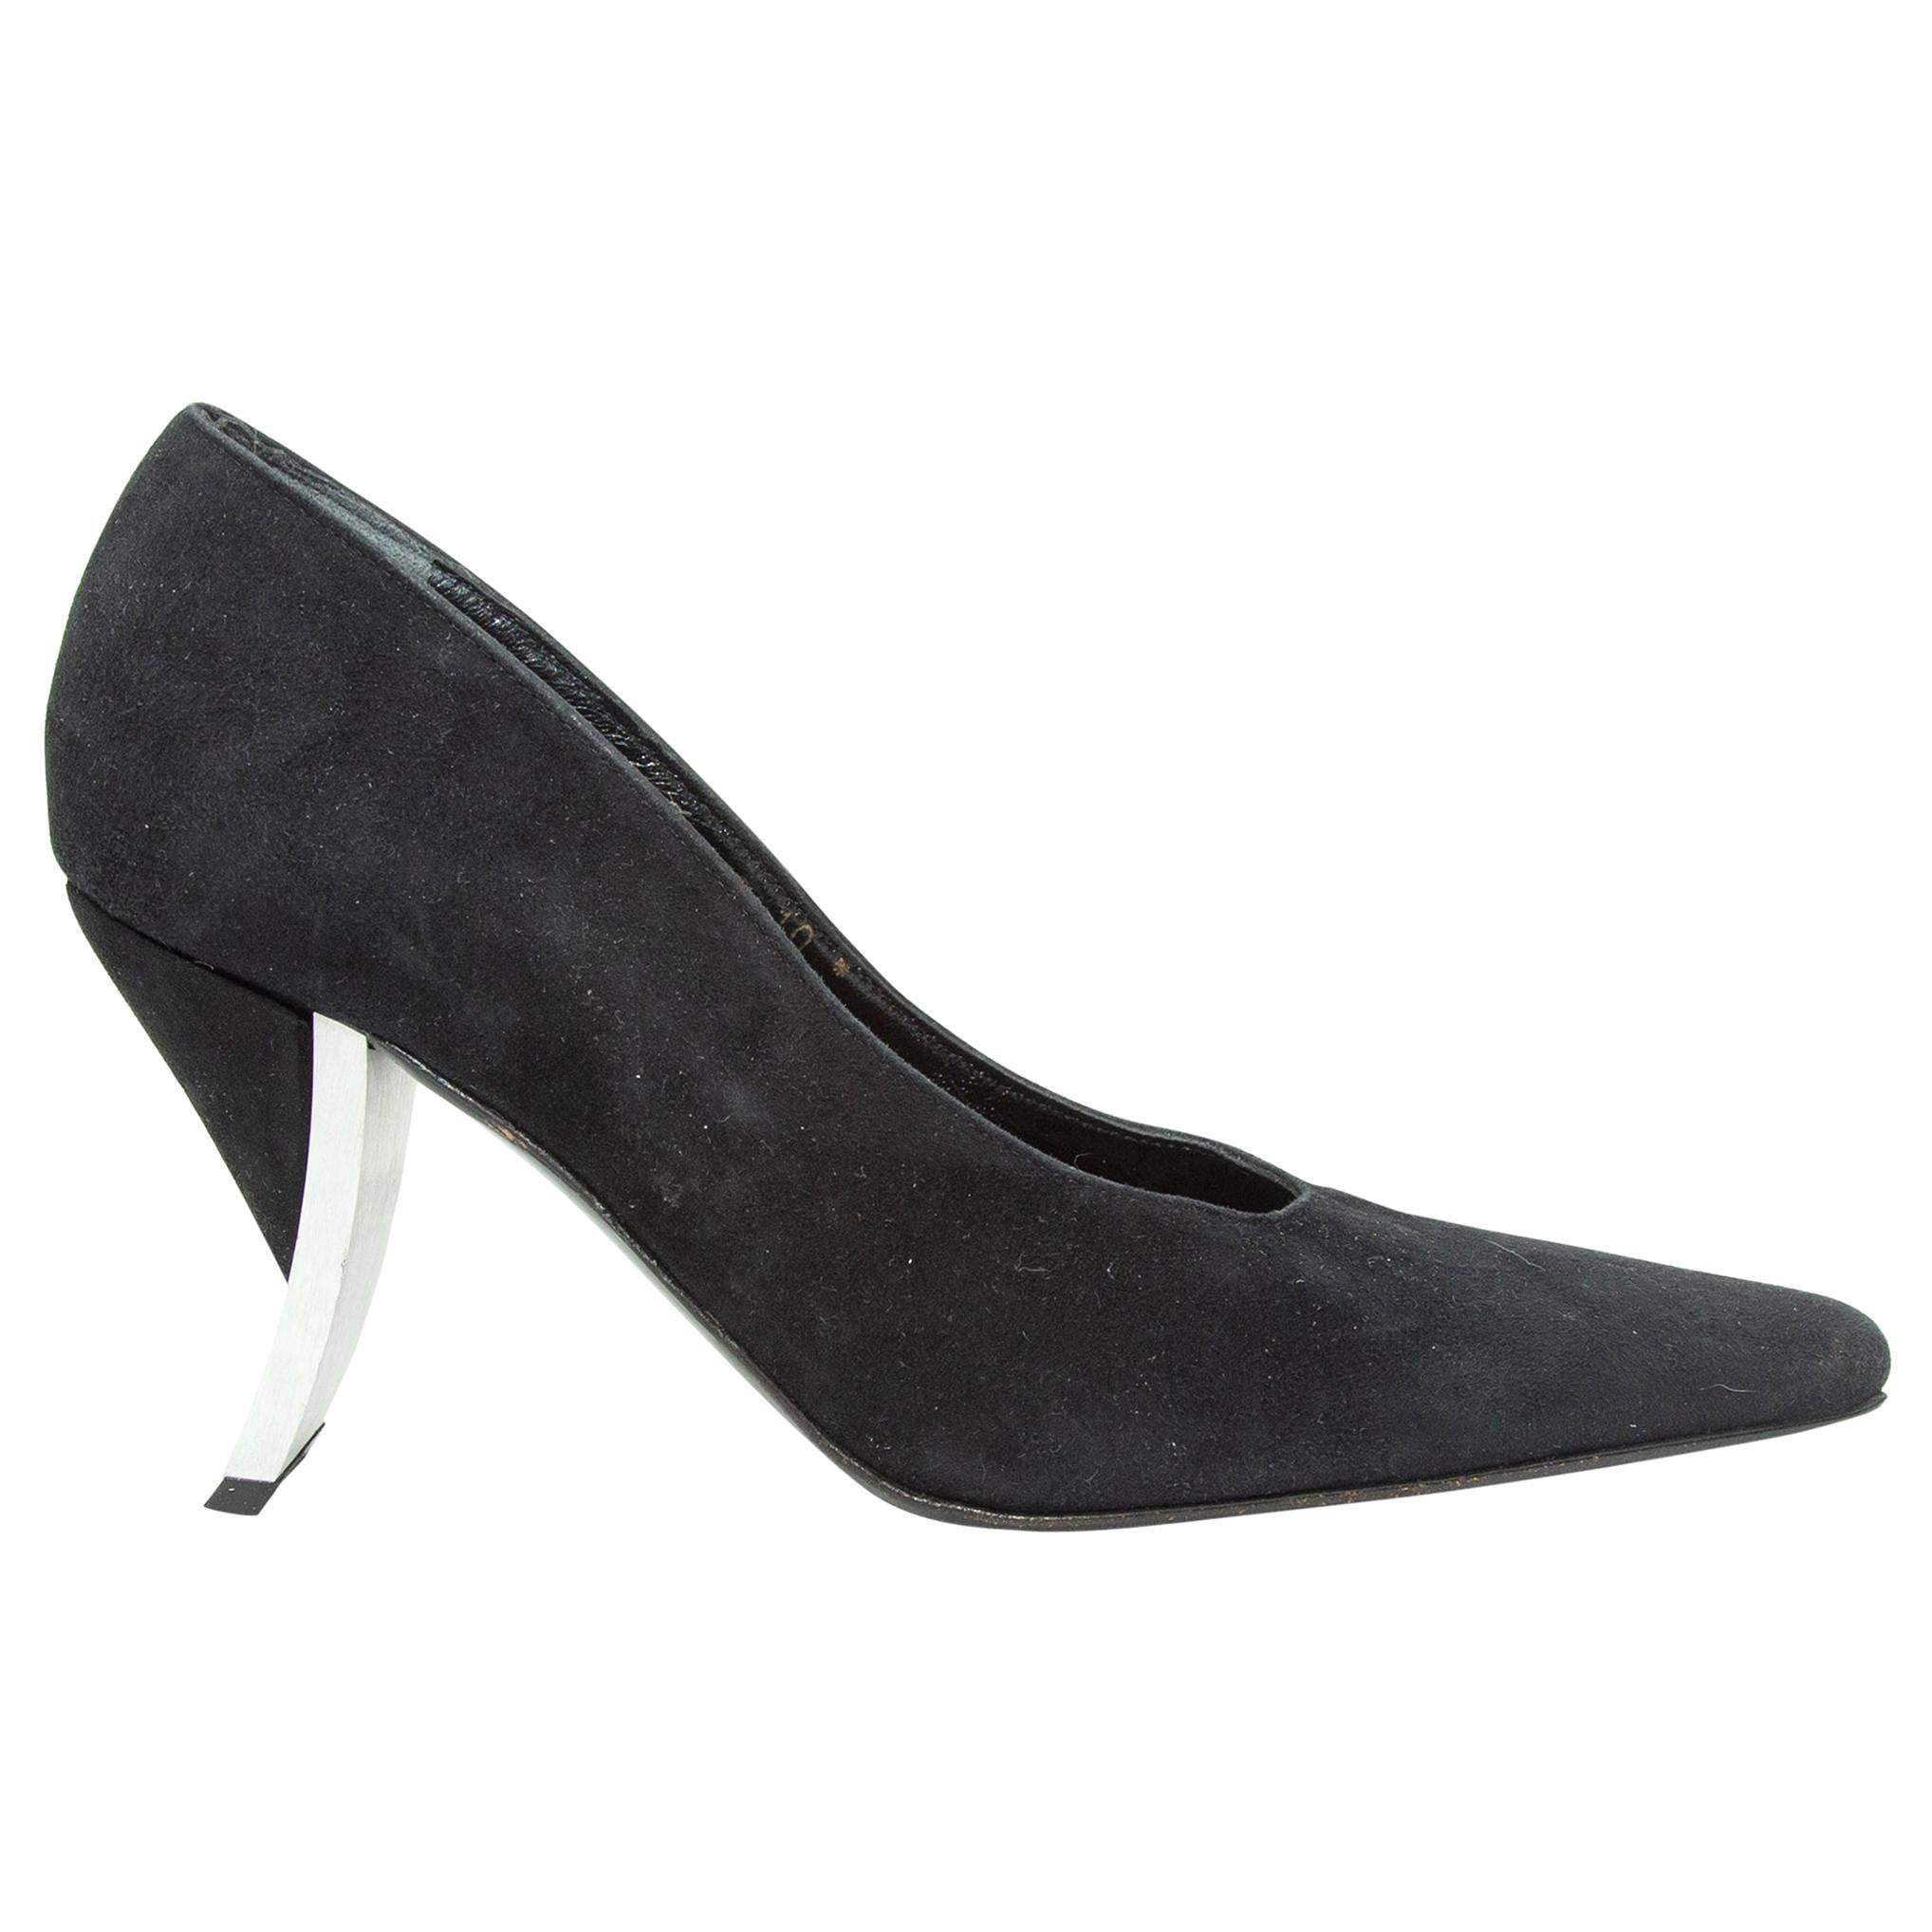 Robert Clergerie Black Suede Pointed-Toe Pumps